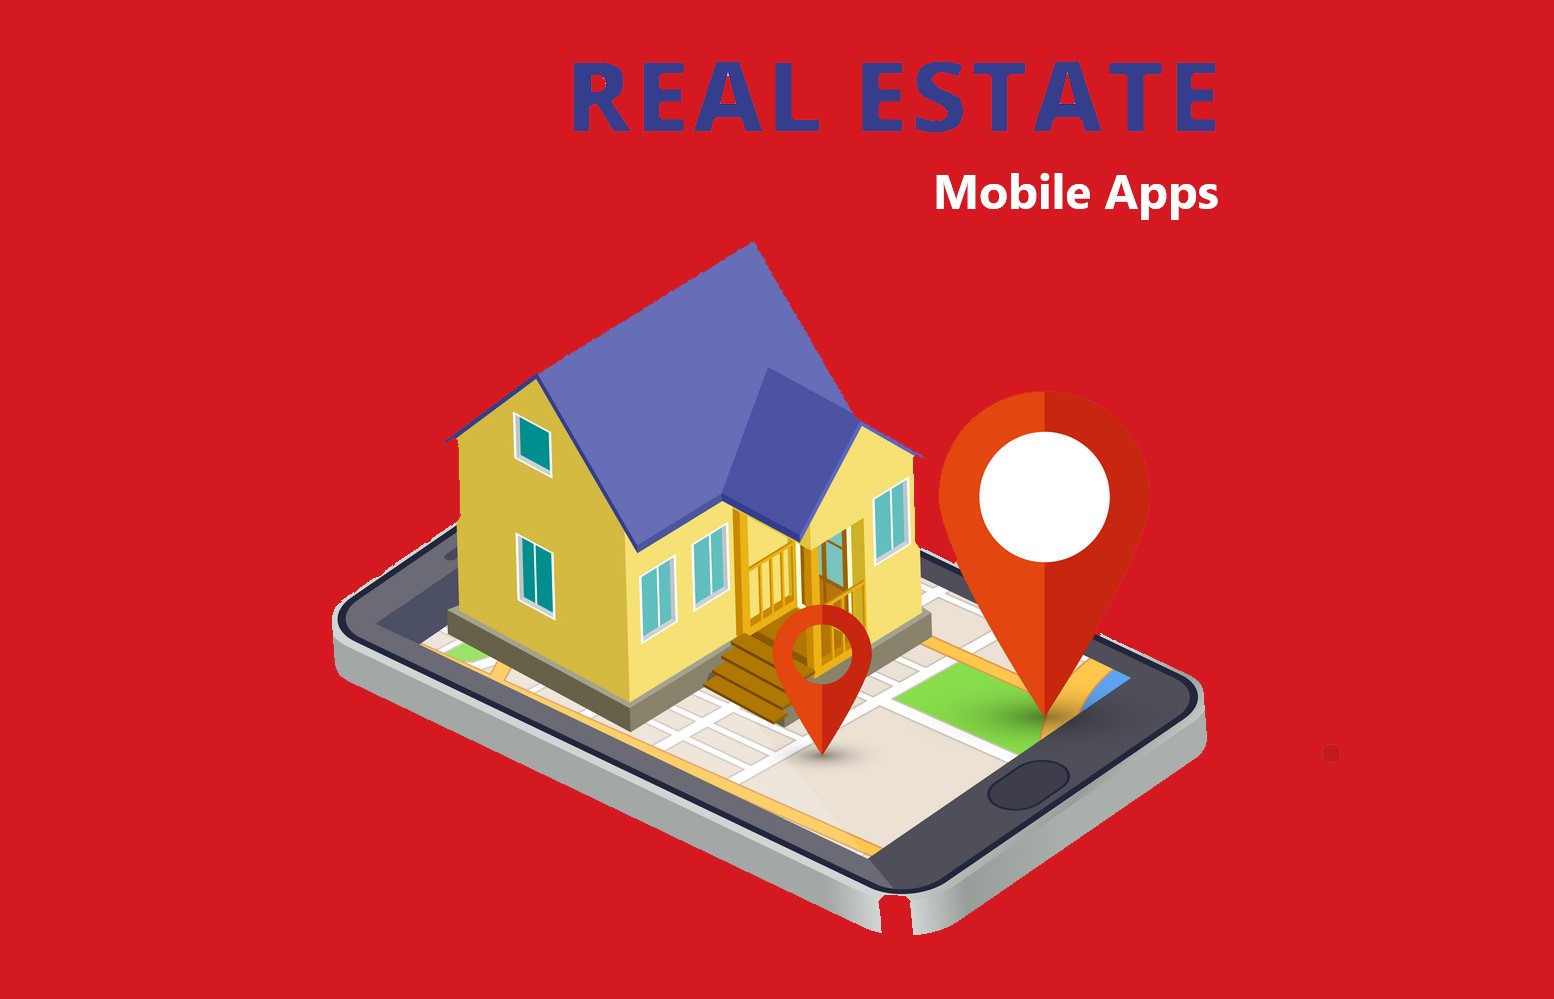 The Benefits of Mobile App in a Real Estate Business